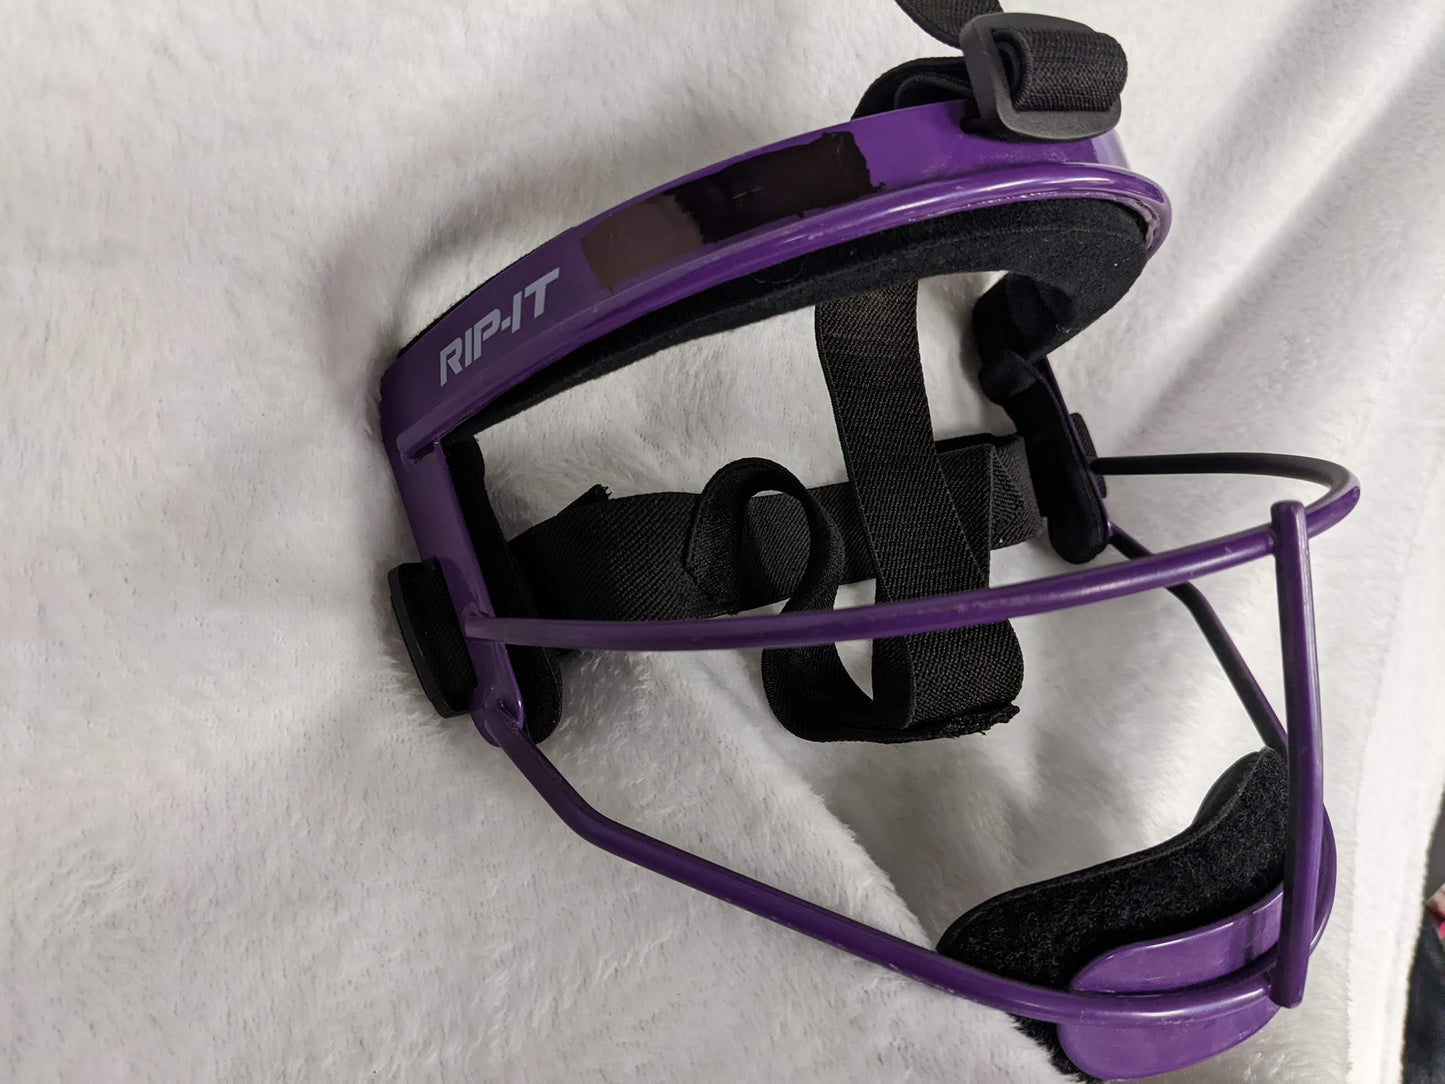 Rip-It Defense Pro Youth Softball Mask Size Youth Color Purple Condition Used